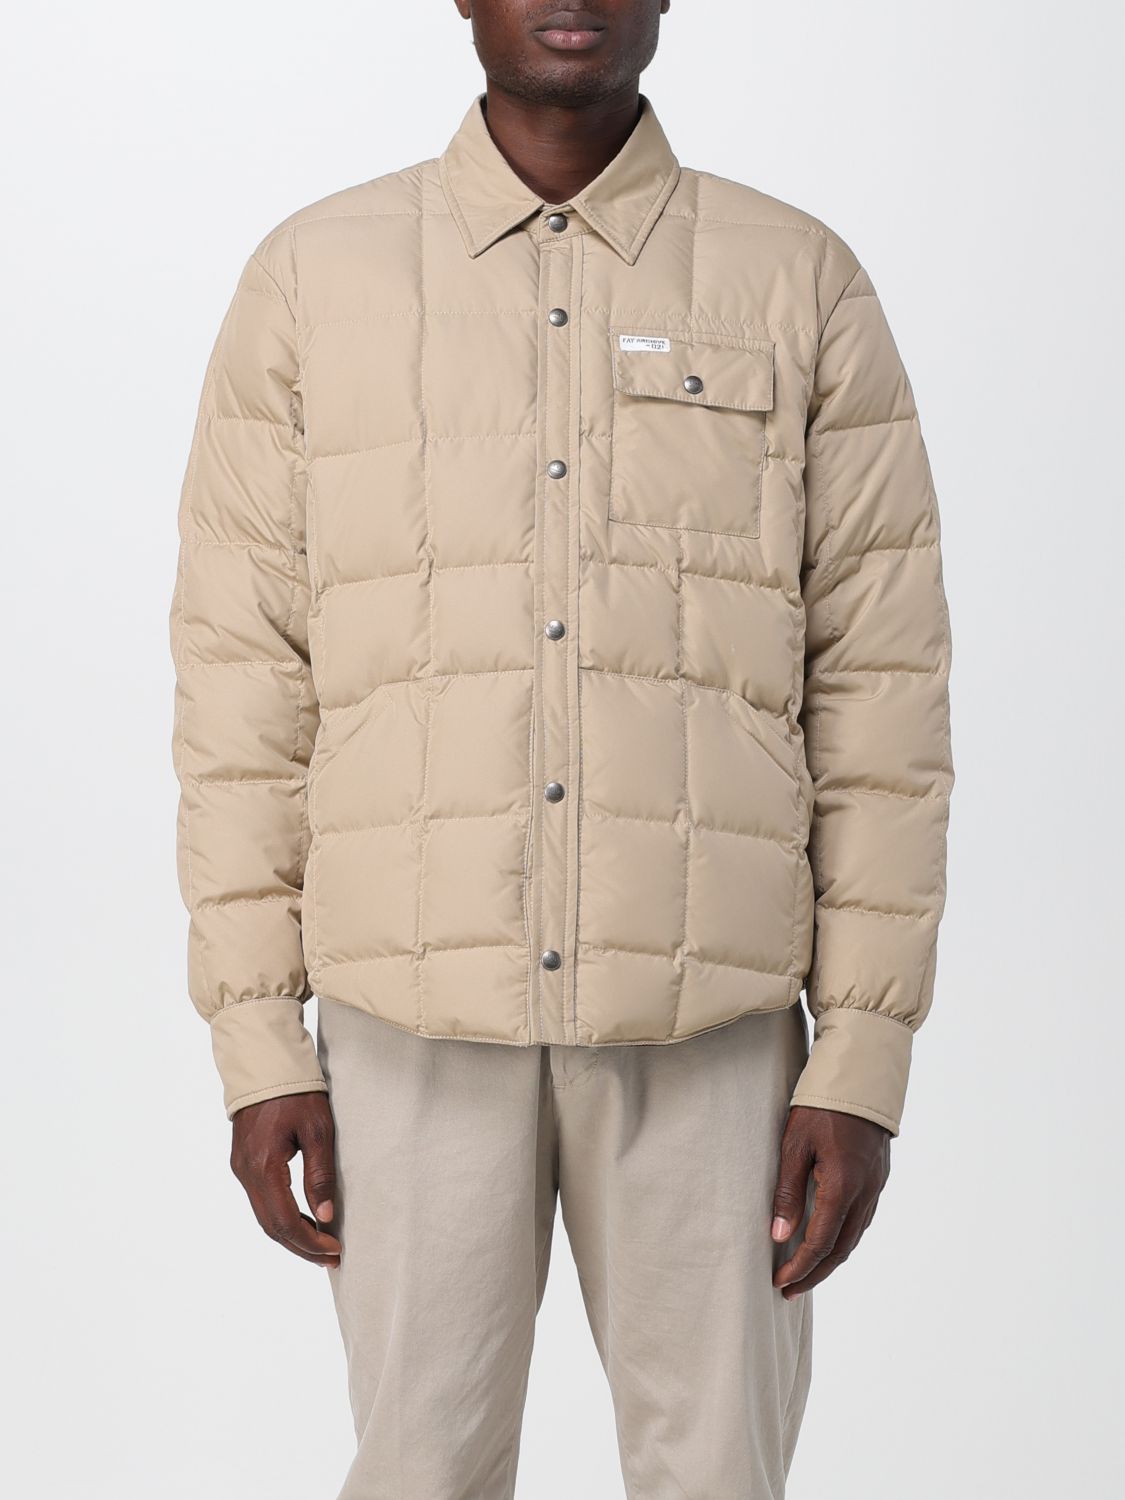 Patagonia Isthmus Quilted Shirt Jacket - Men's - Clothing